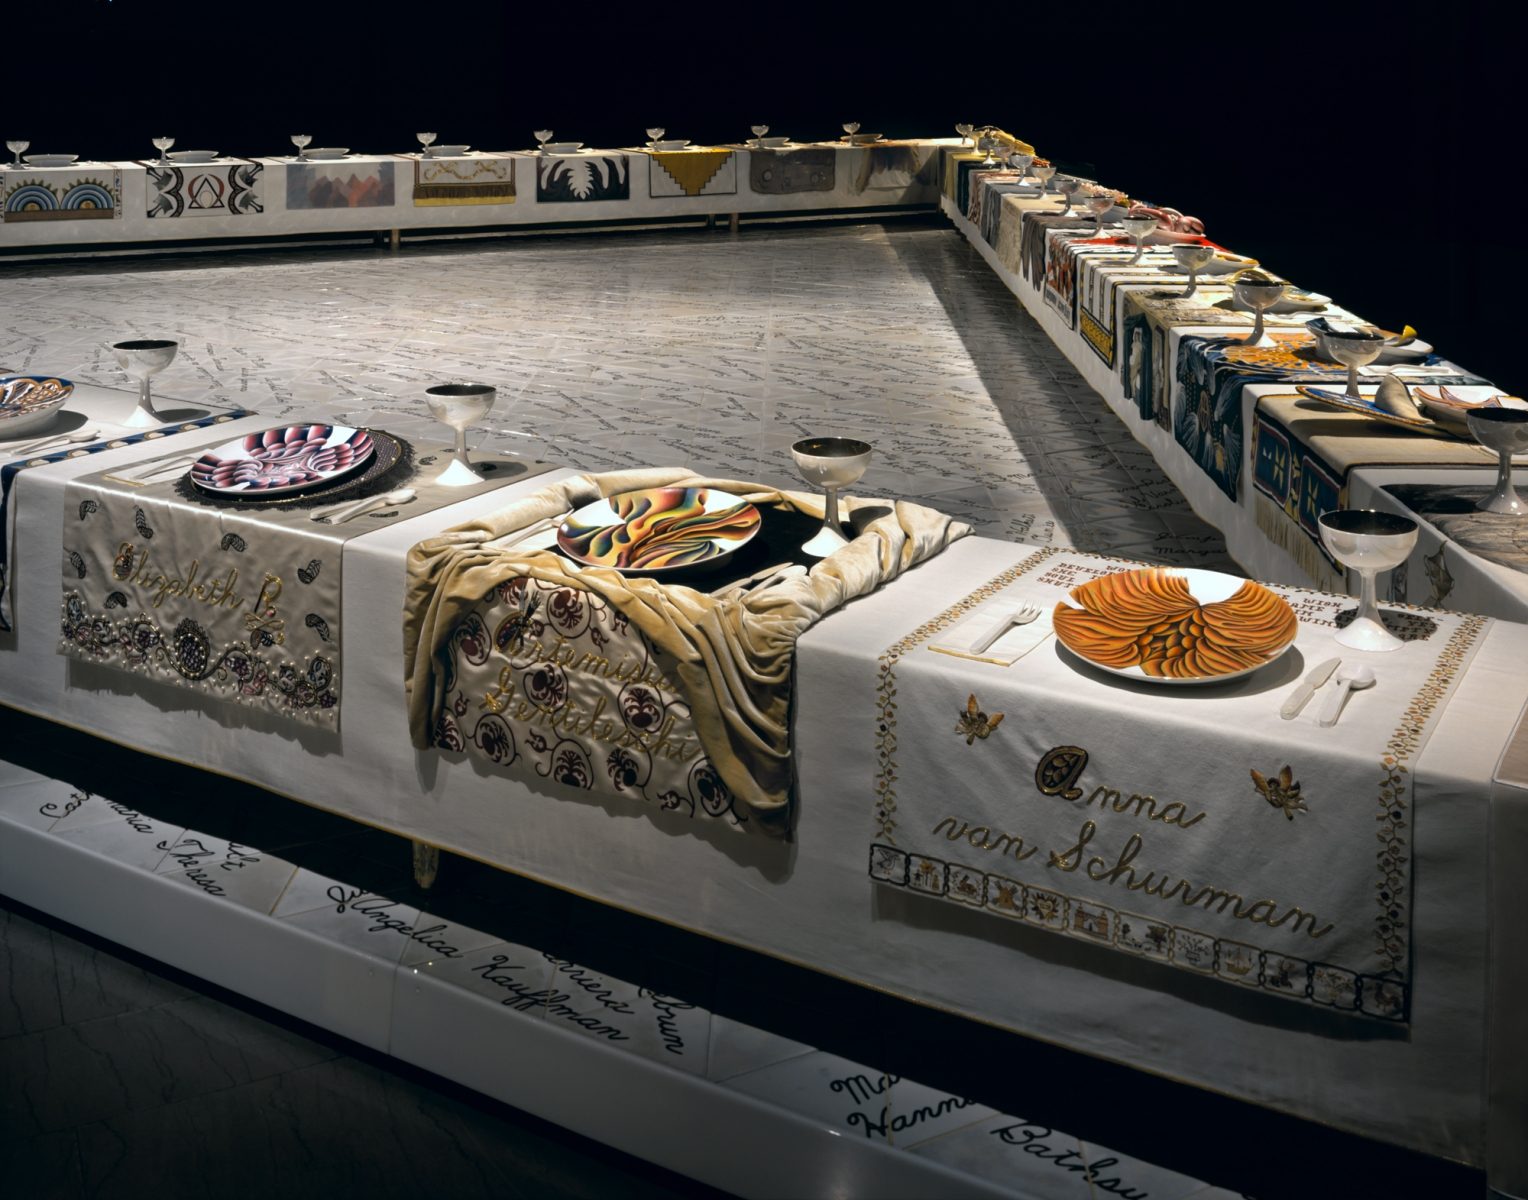 Judy Chicago's "Dinner Party" 